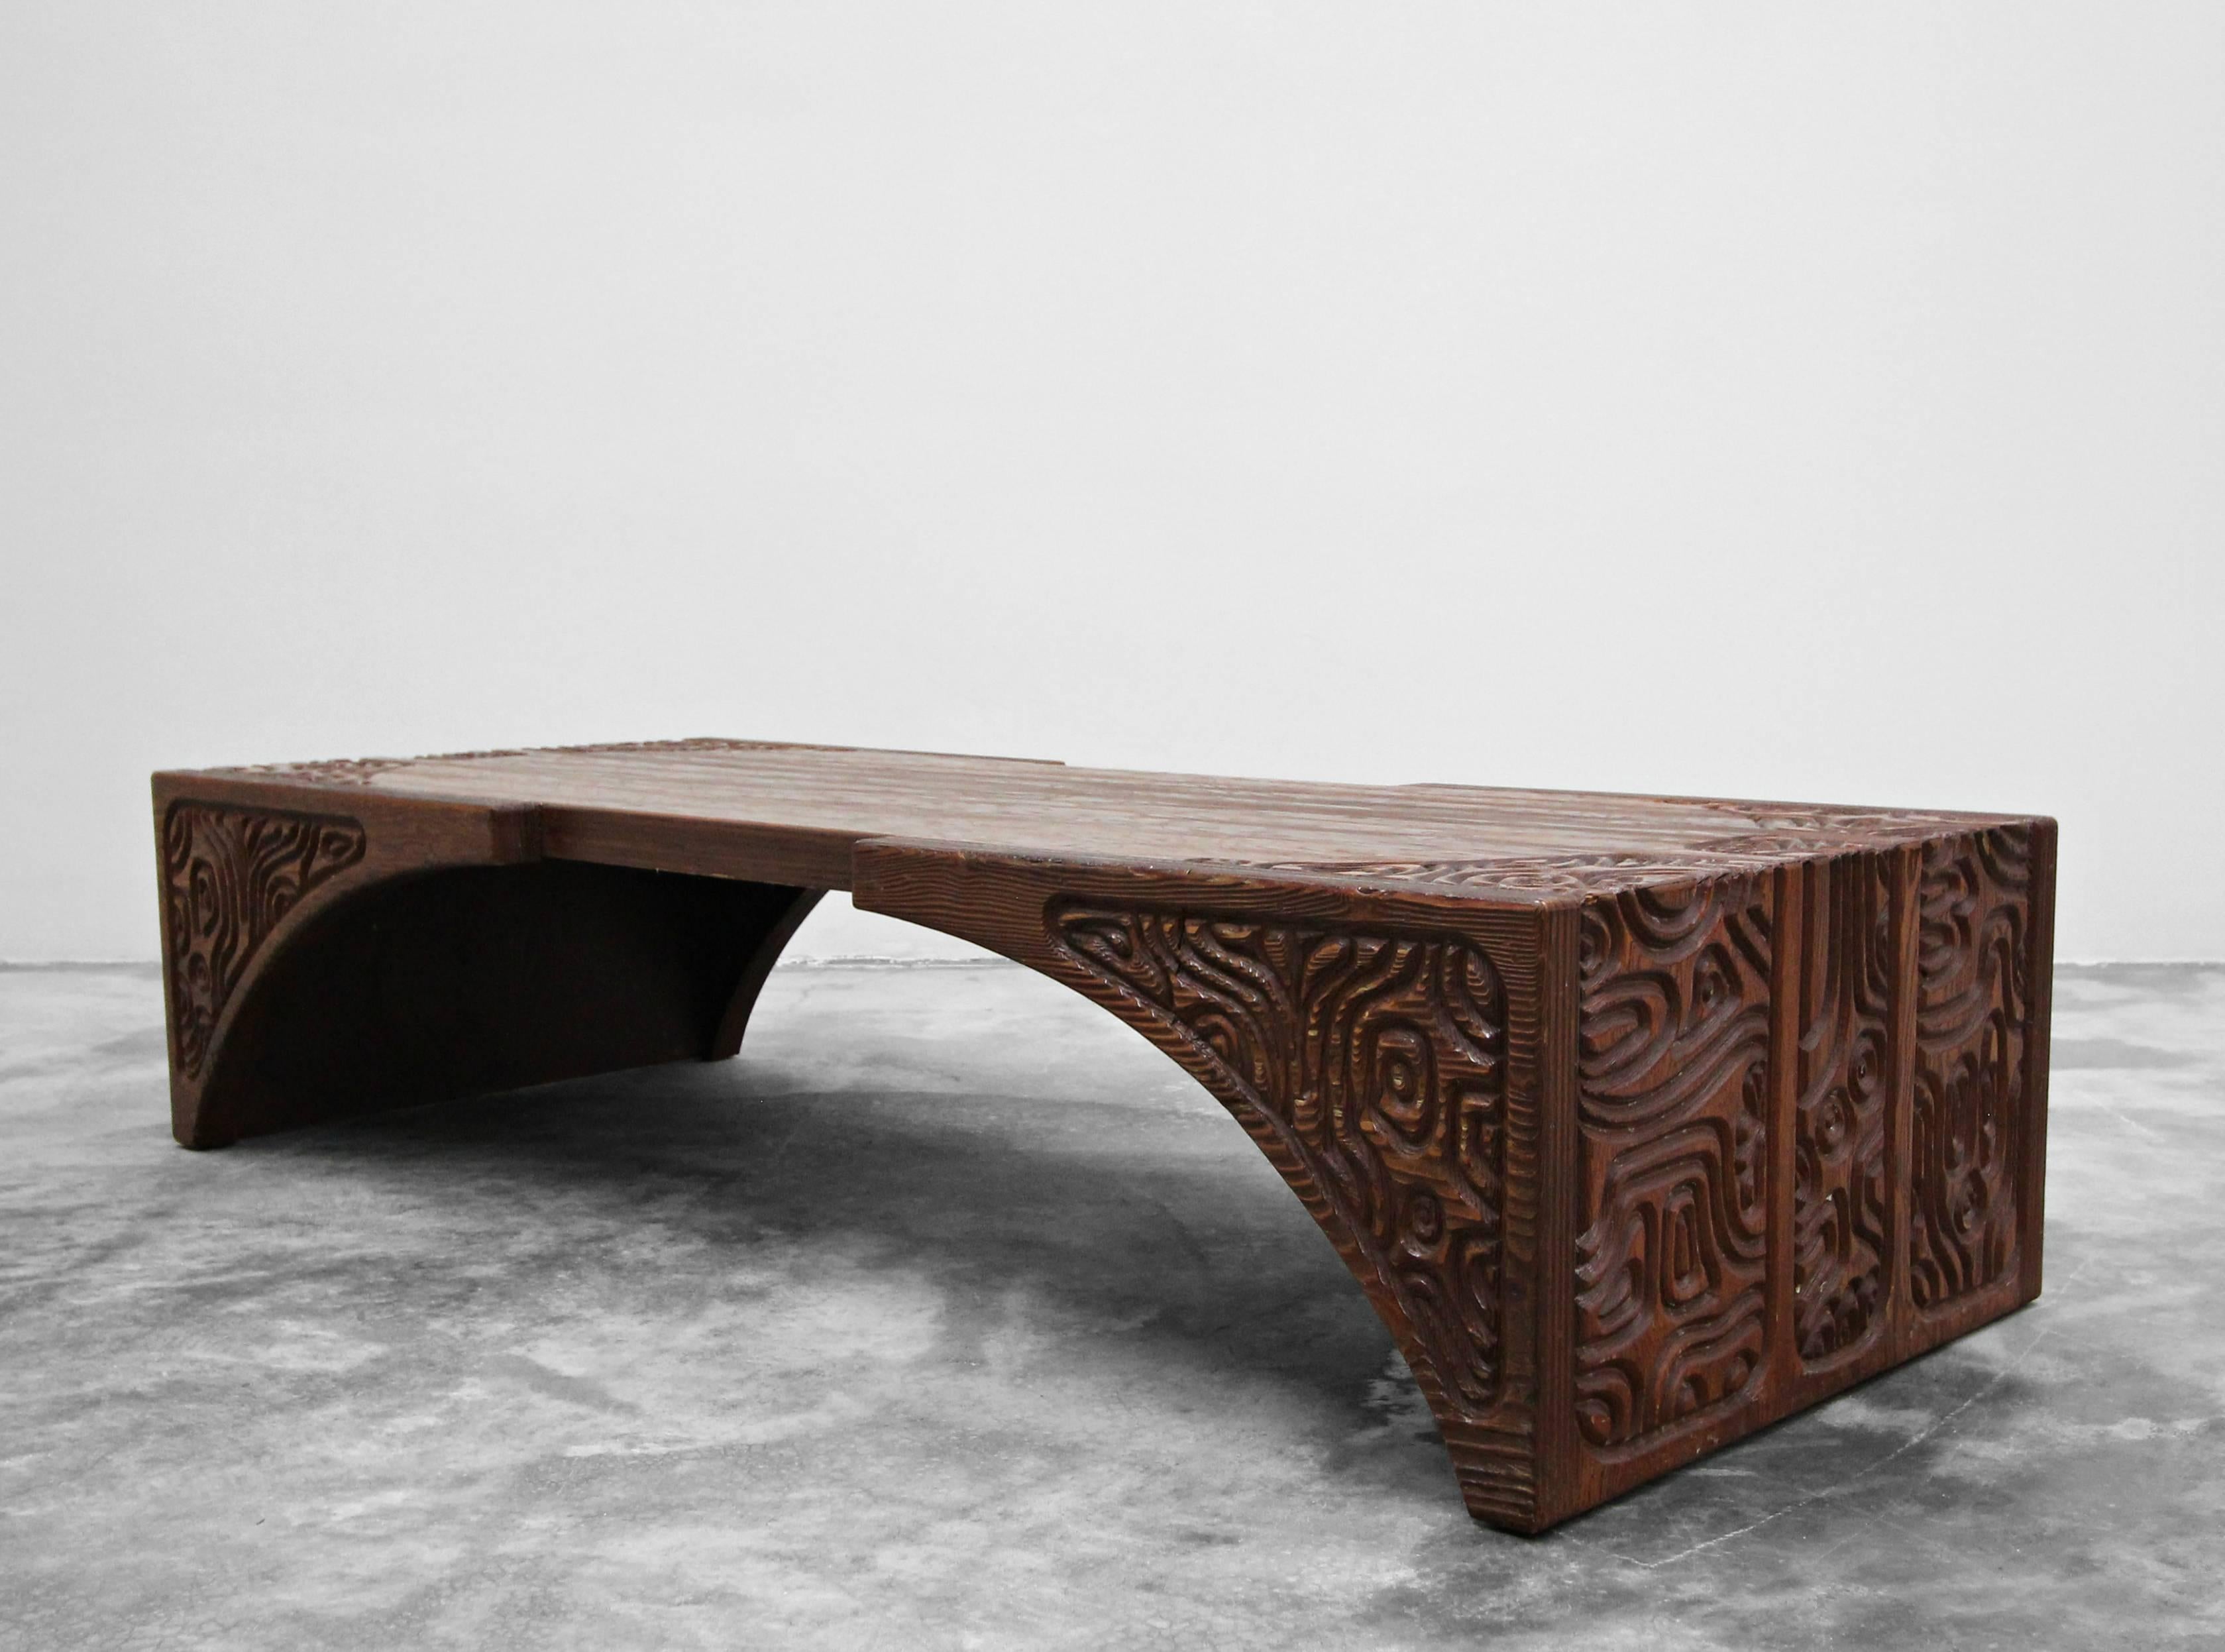 There are no words.

This table is a design masterpieces. With intricate and intriguing carved wood details, unique, eclectic pieces. Lending itself to designs by Everlyn Ackerman and Murray Feldman.

Would also make an amazing bench.

This